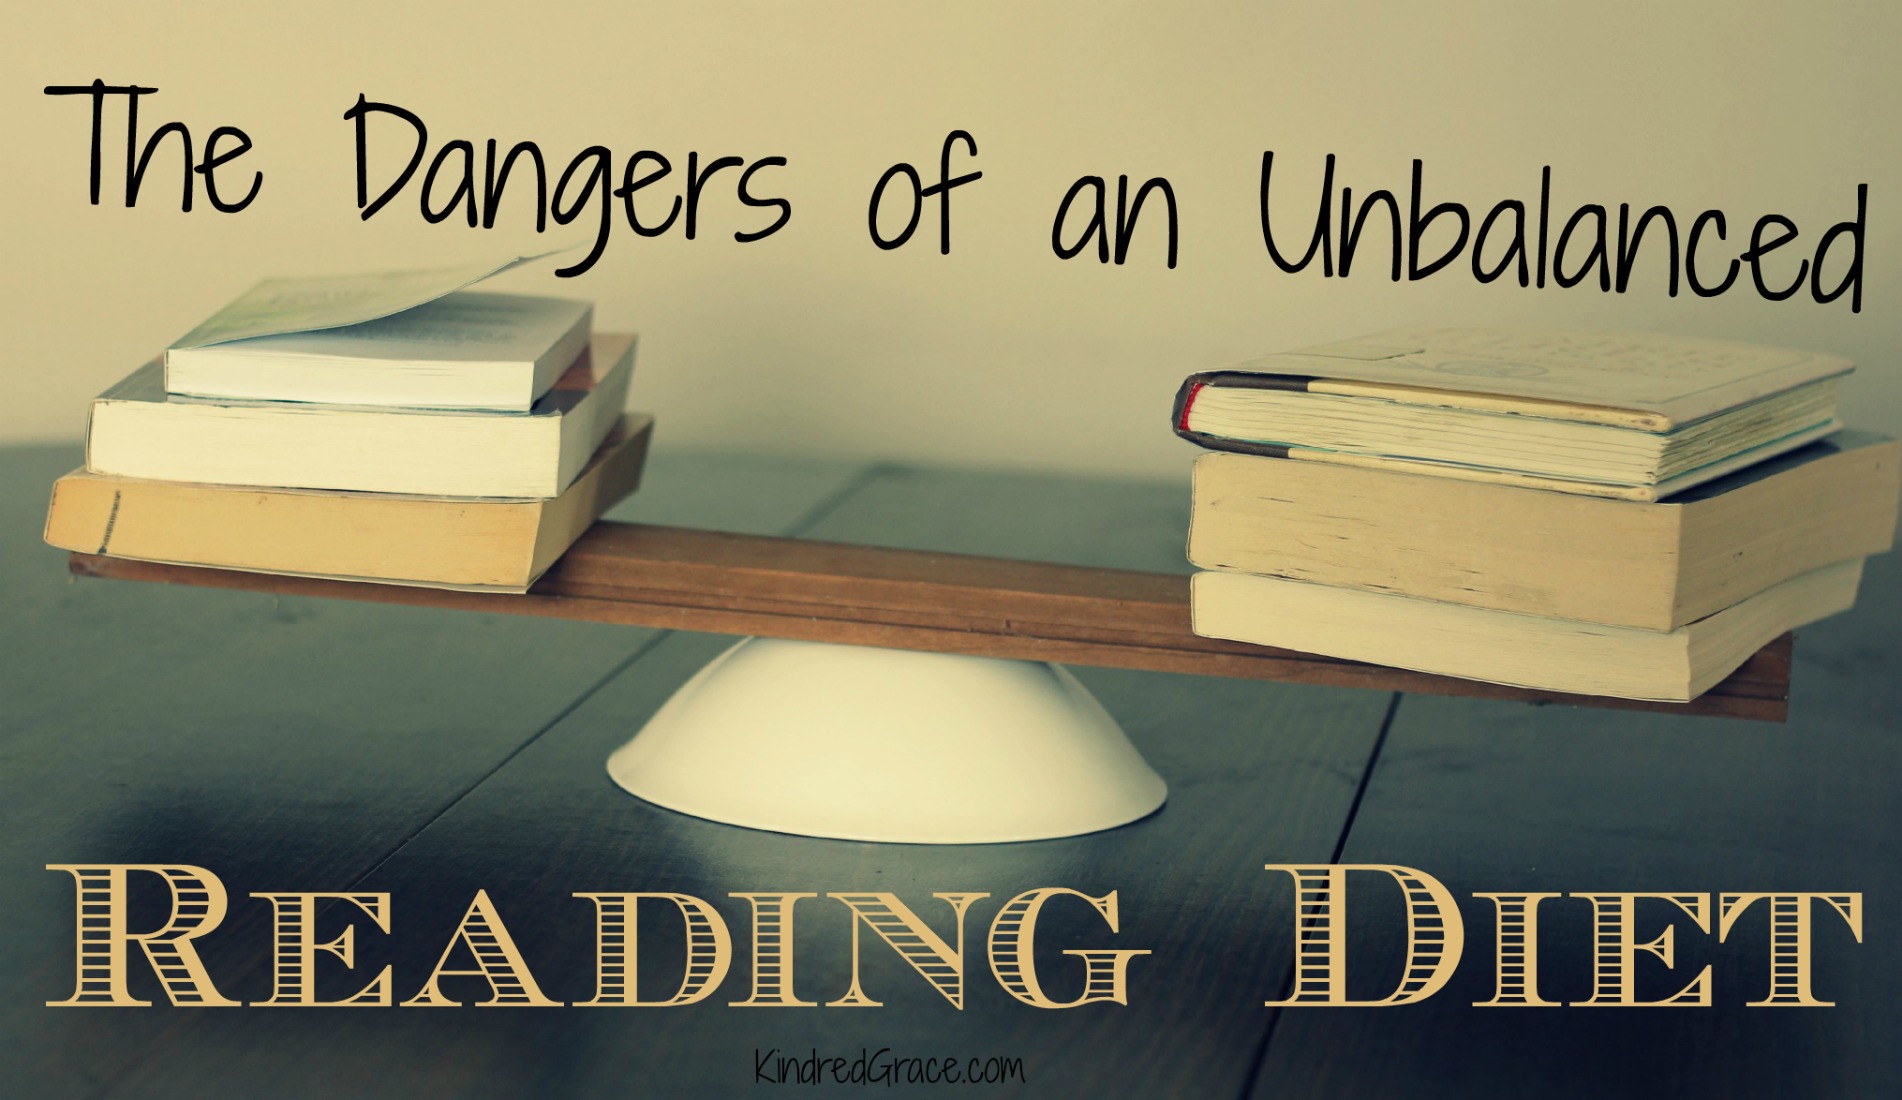 The Danger of an Unbalanced Reading Diet